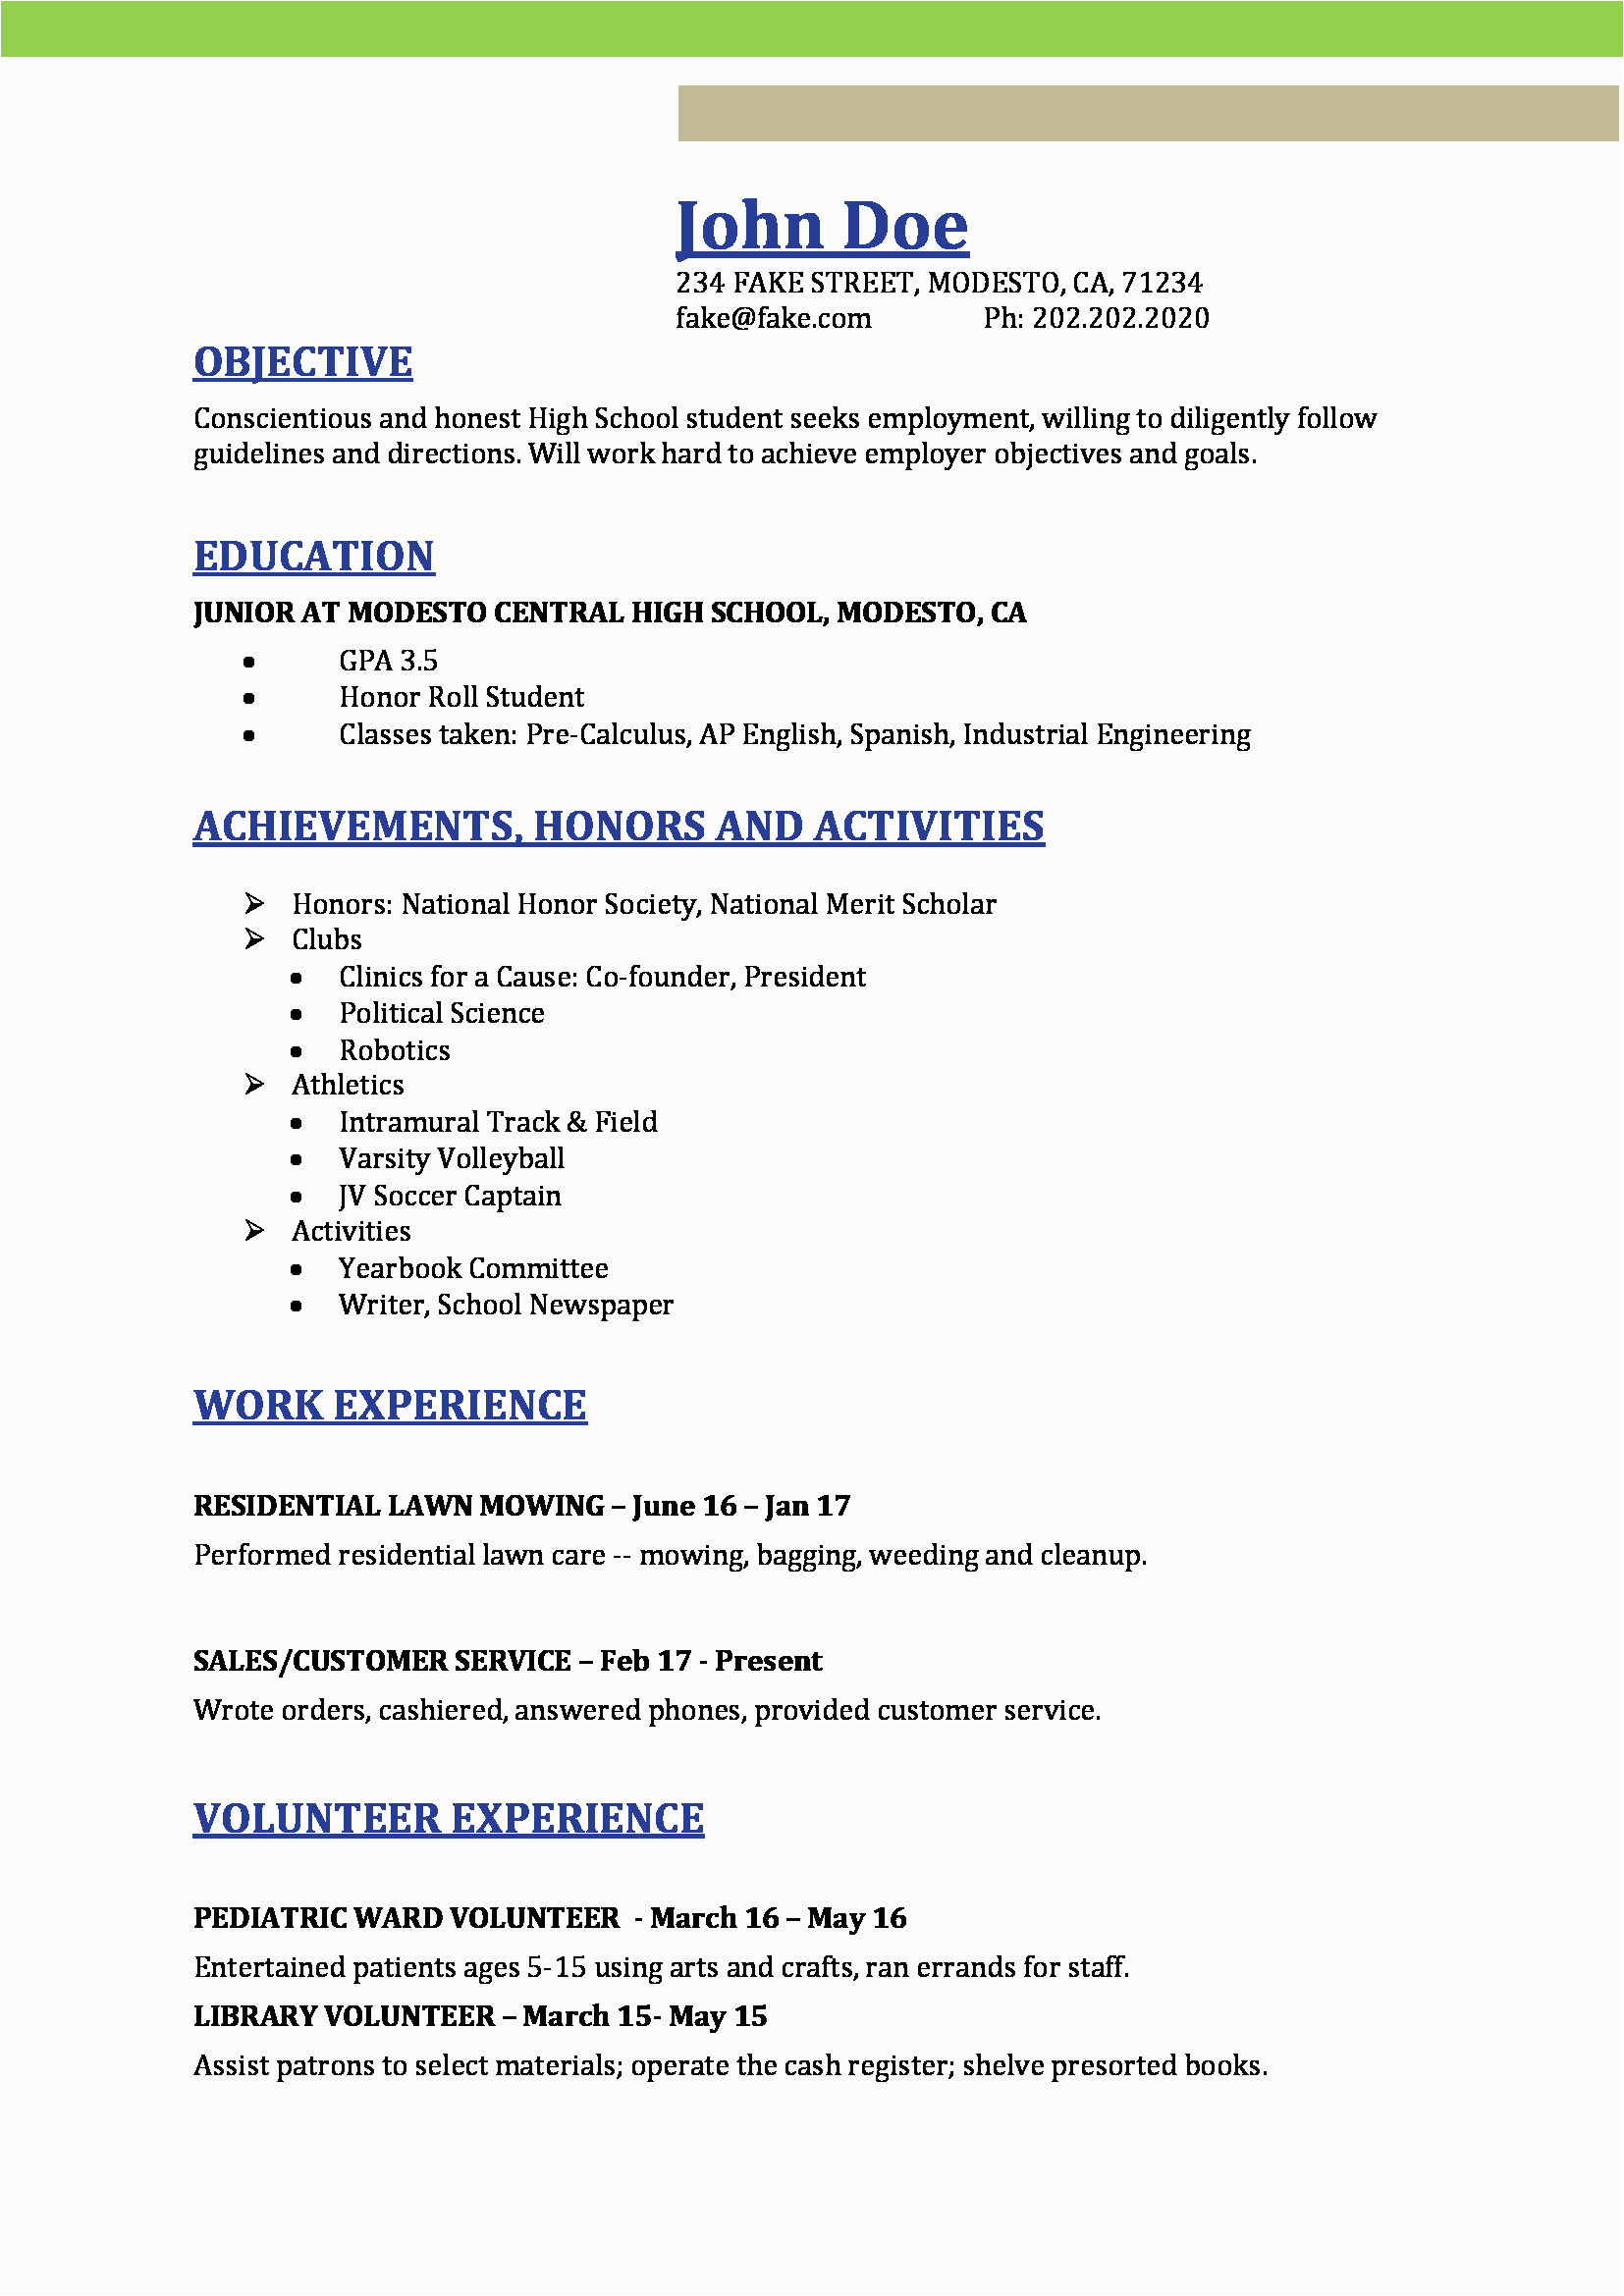 Sample Resume for Highschool Students with Volunteer Experience High School Resume Resume Templates for High School